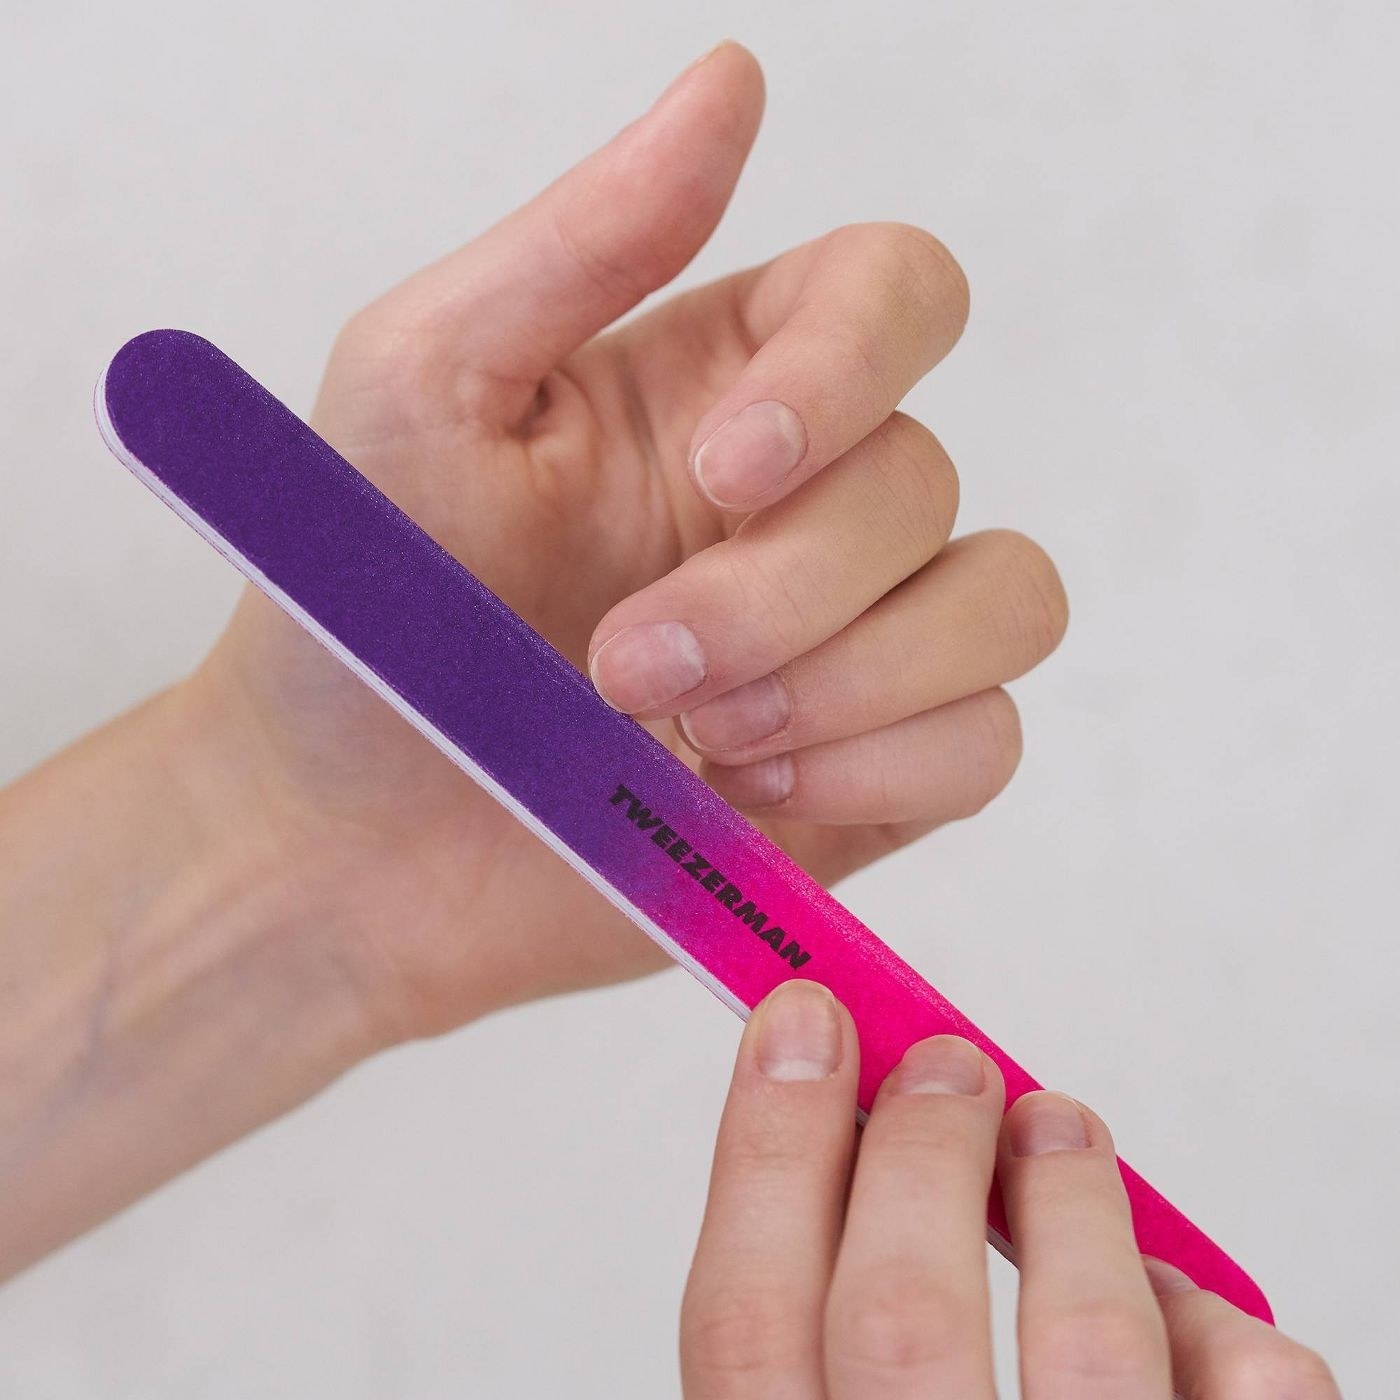 The neon hot nail file